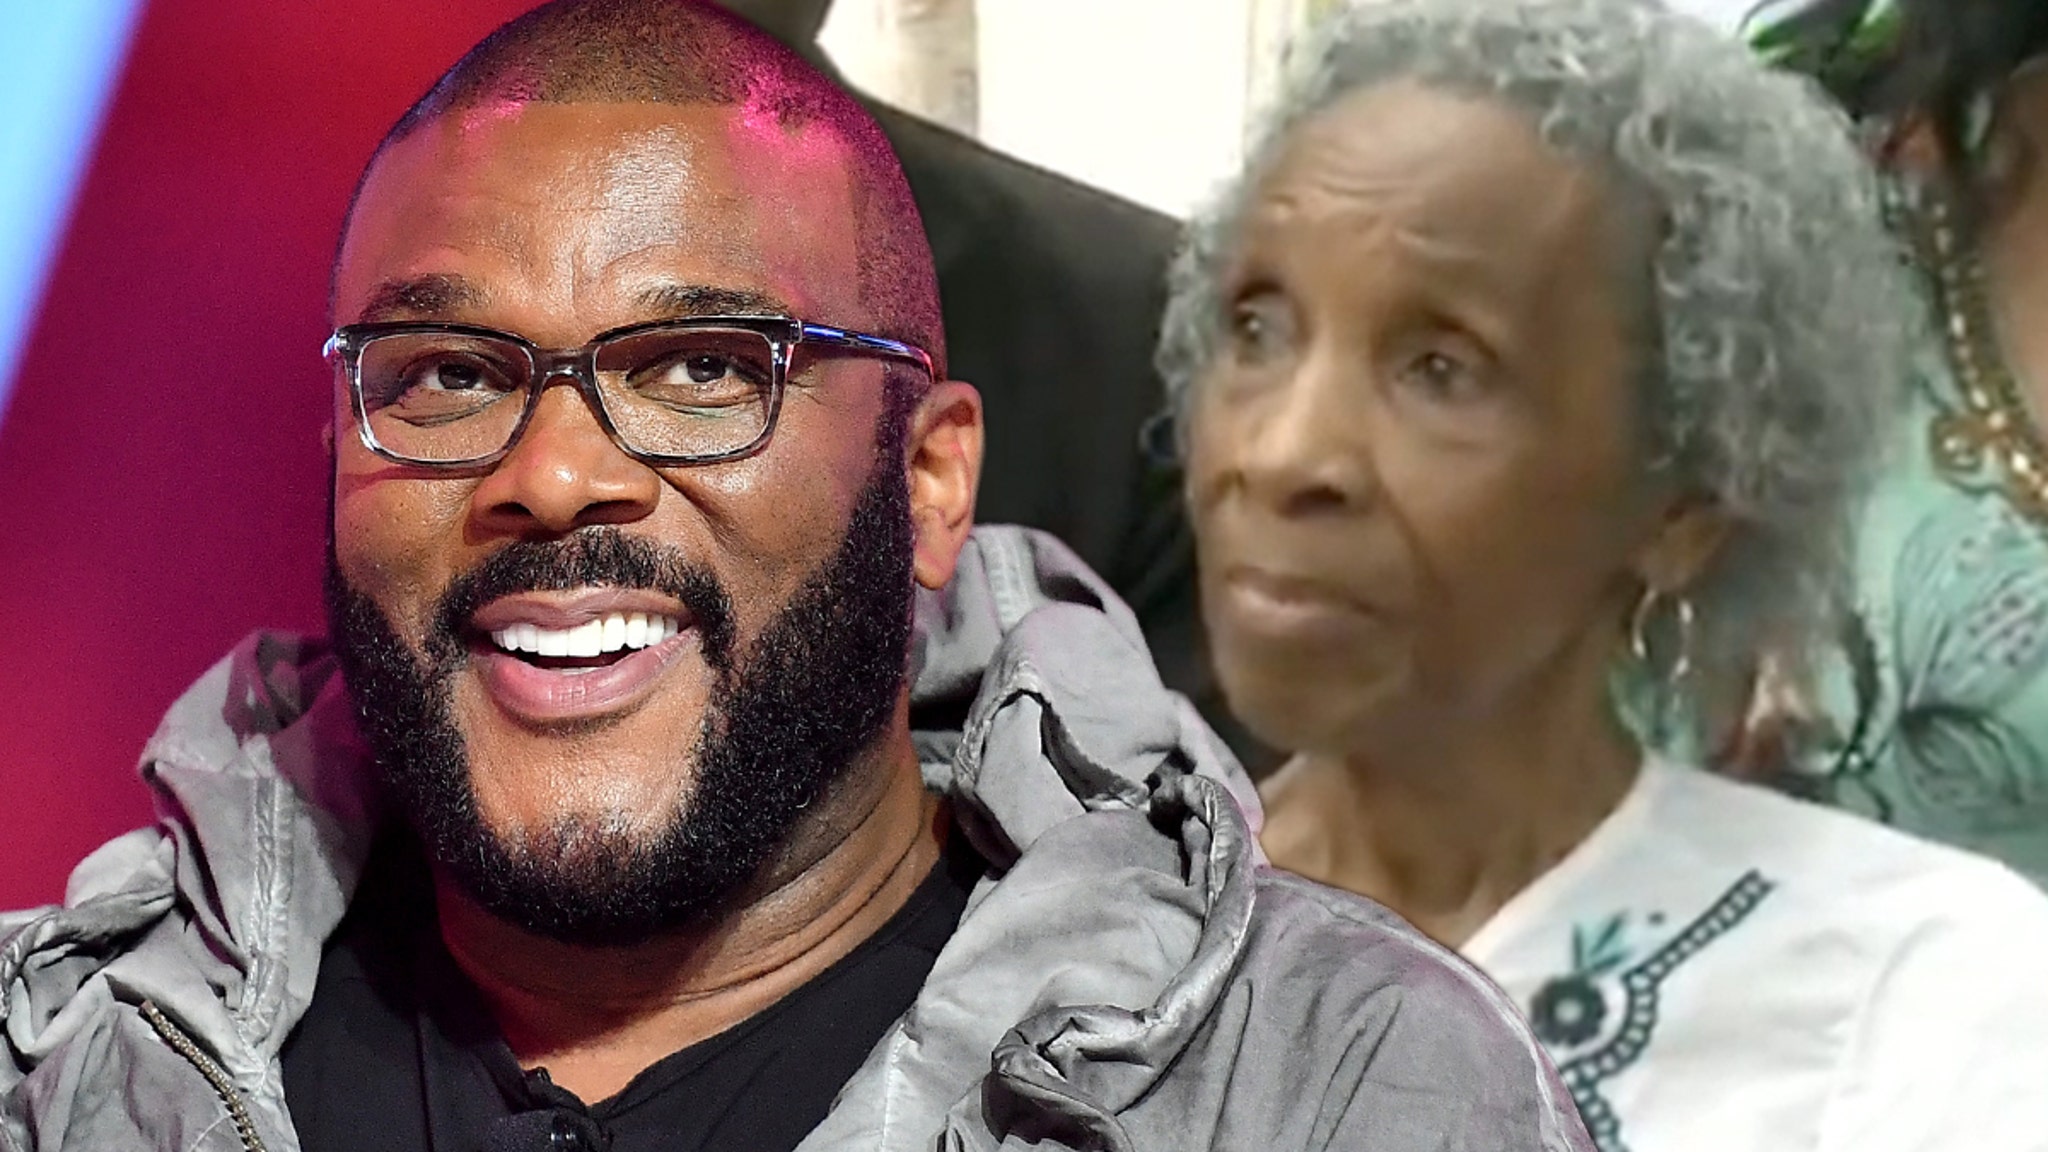 Tyler Perry buys a 93-year-old woman’s house that developers pushed him out of